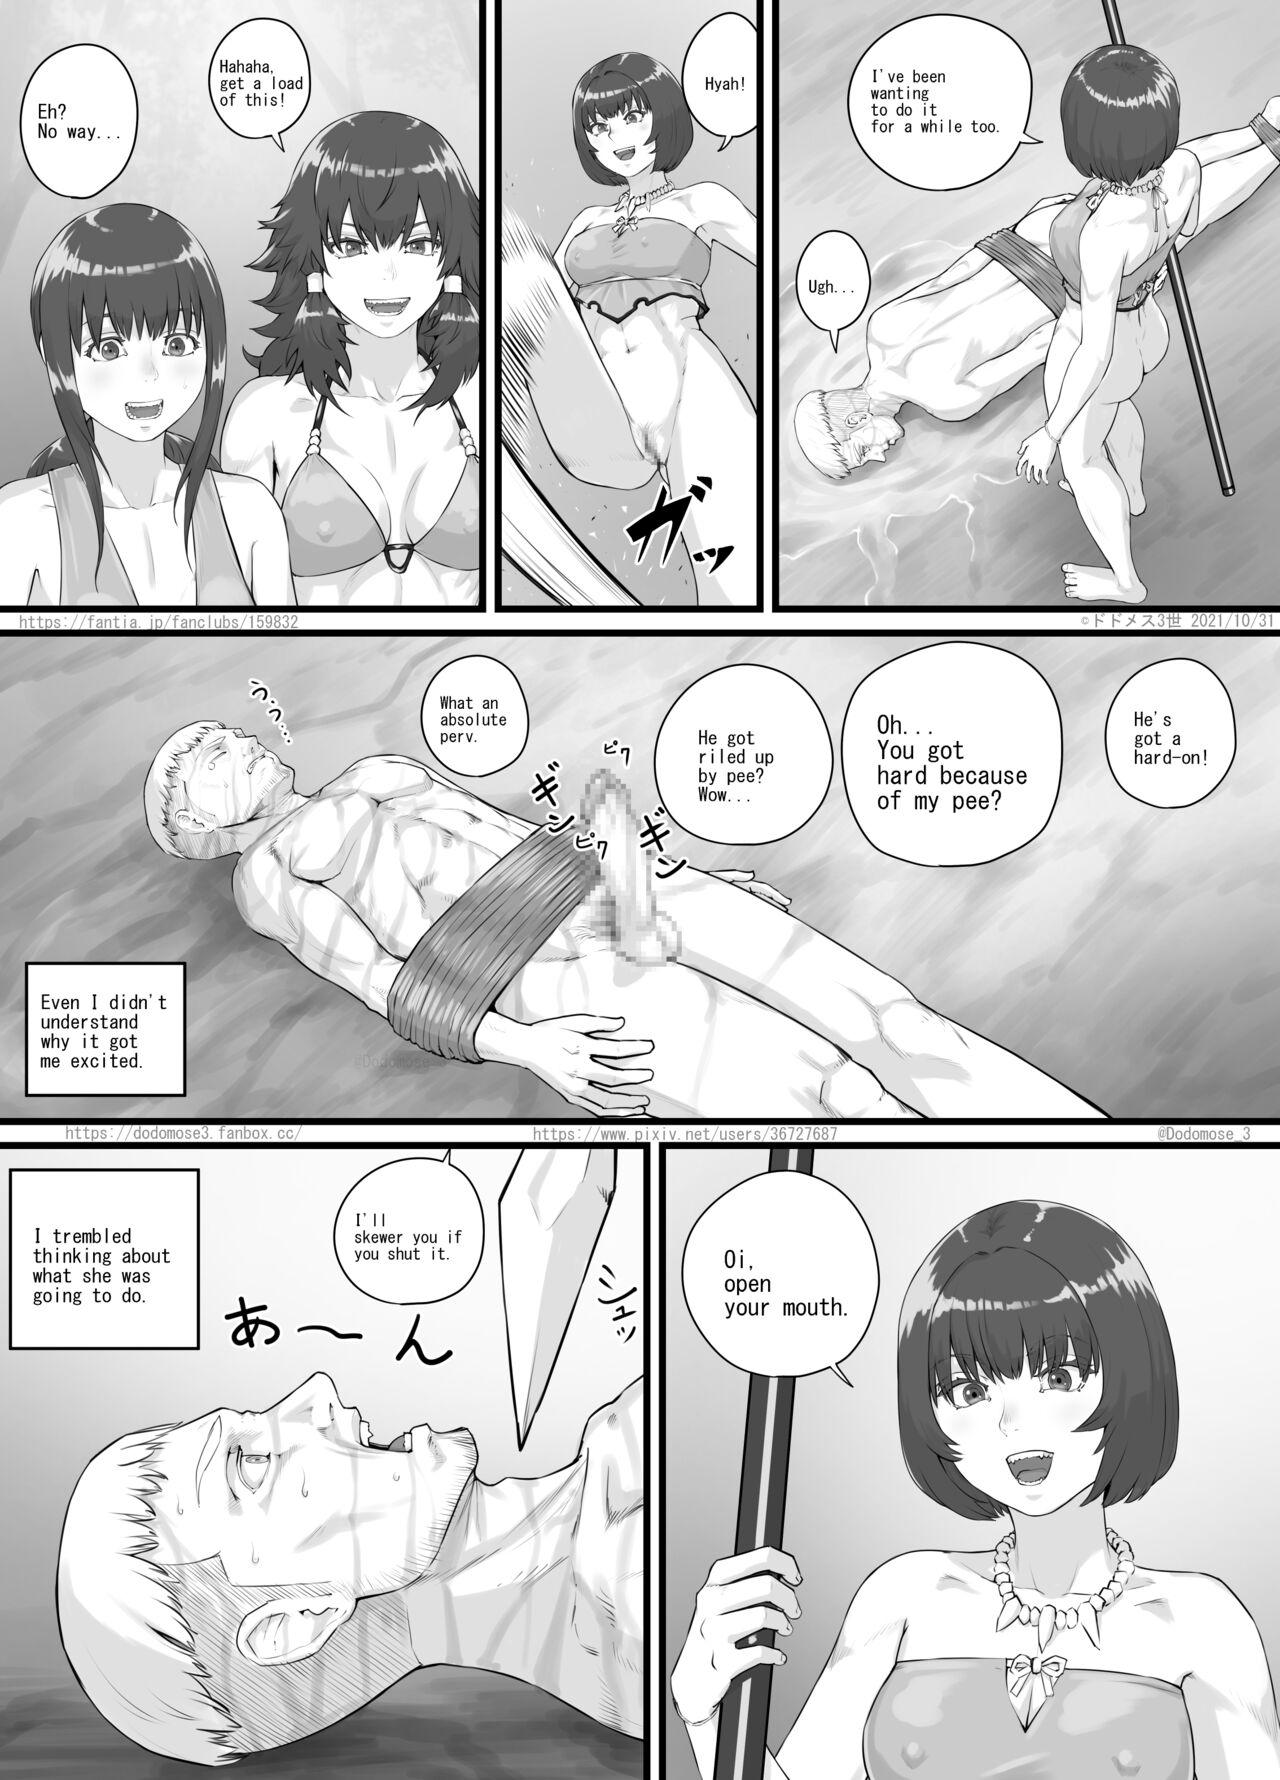 Double Penetration アマゾネス漫画（English Version） - Original Best - Page 11